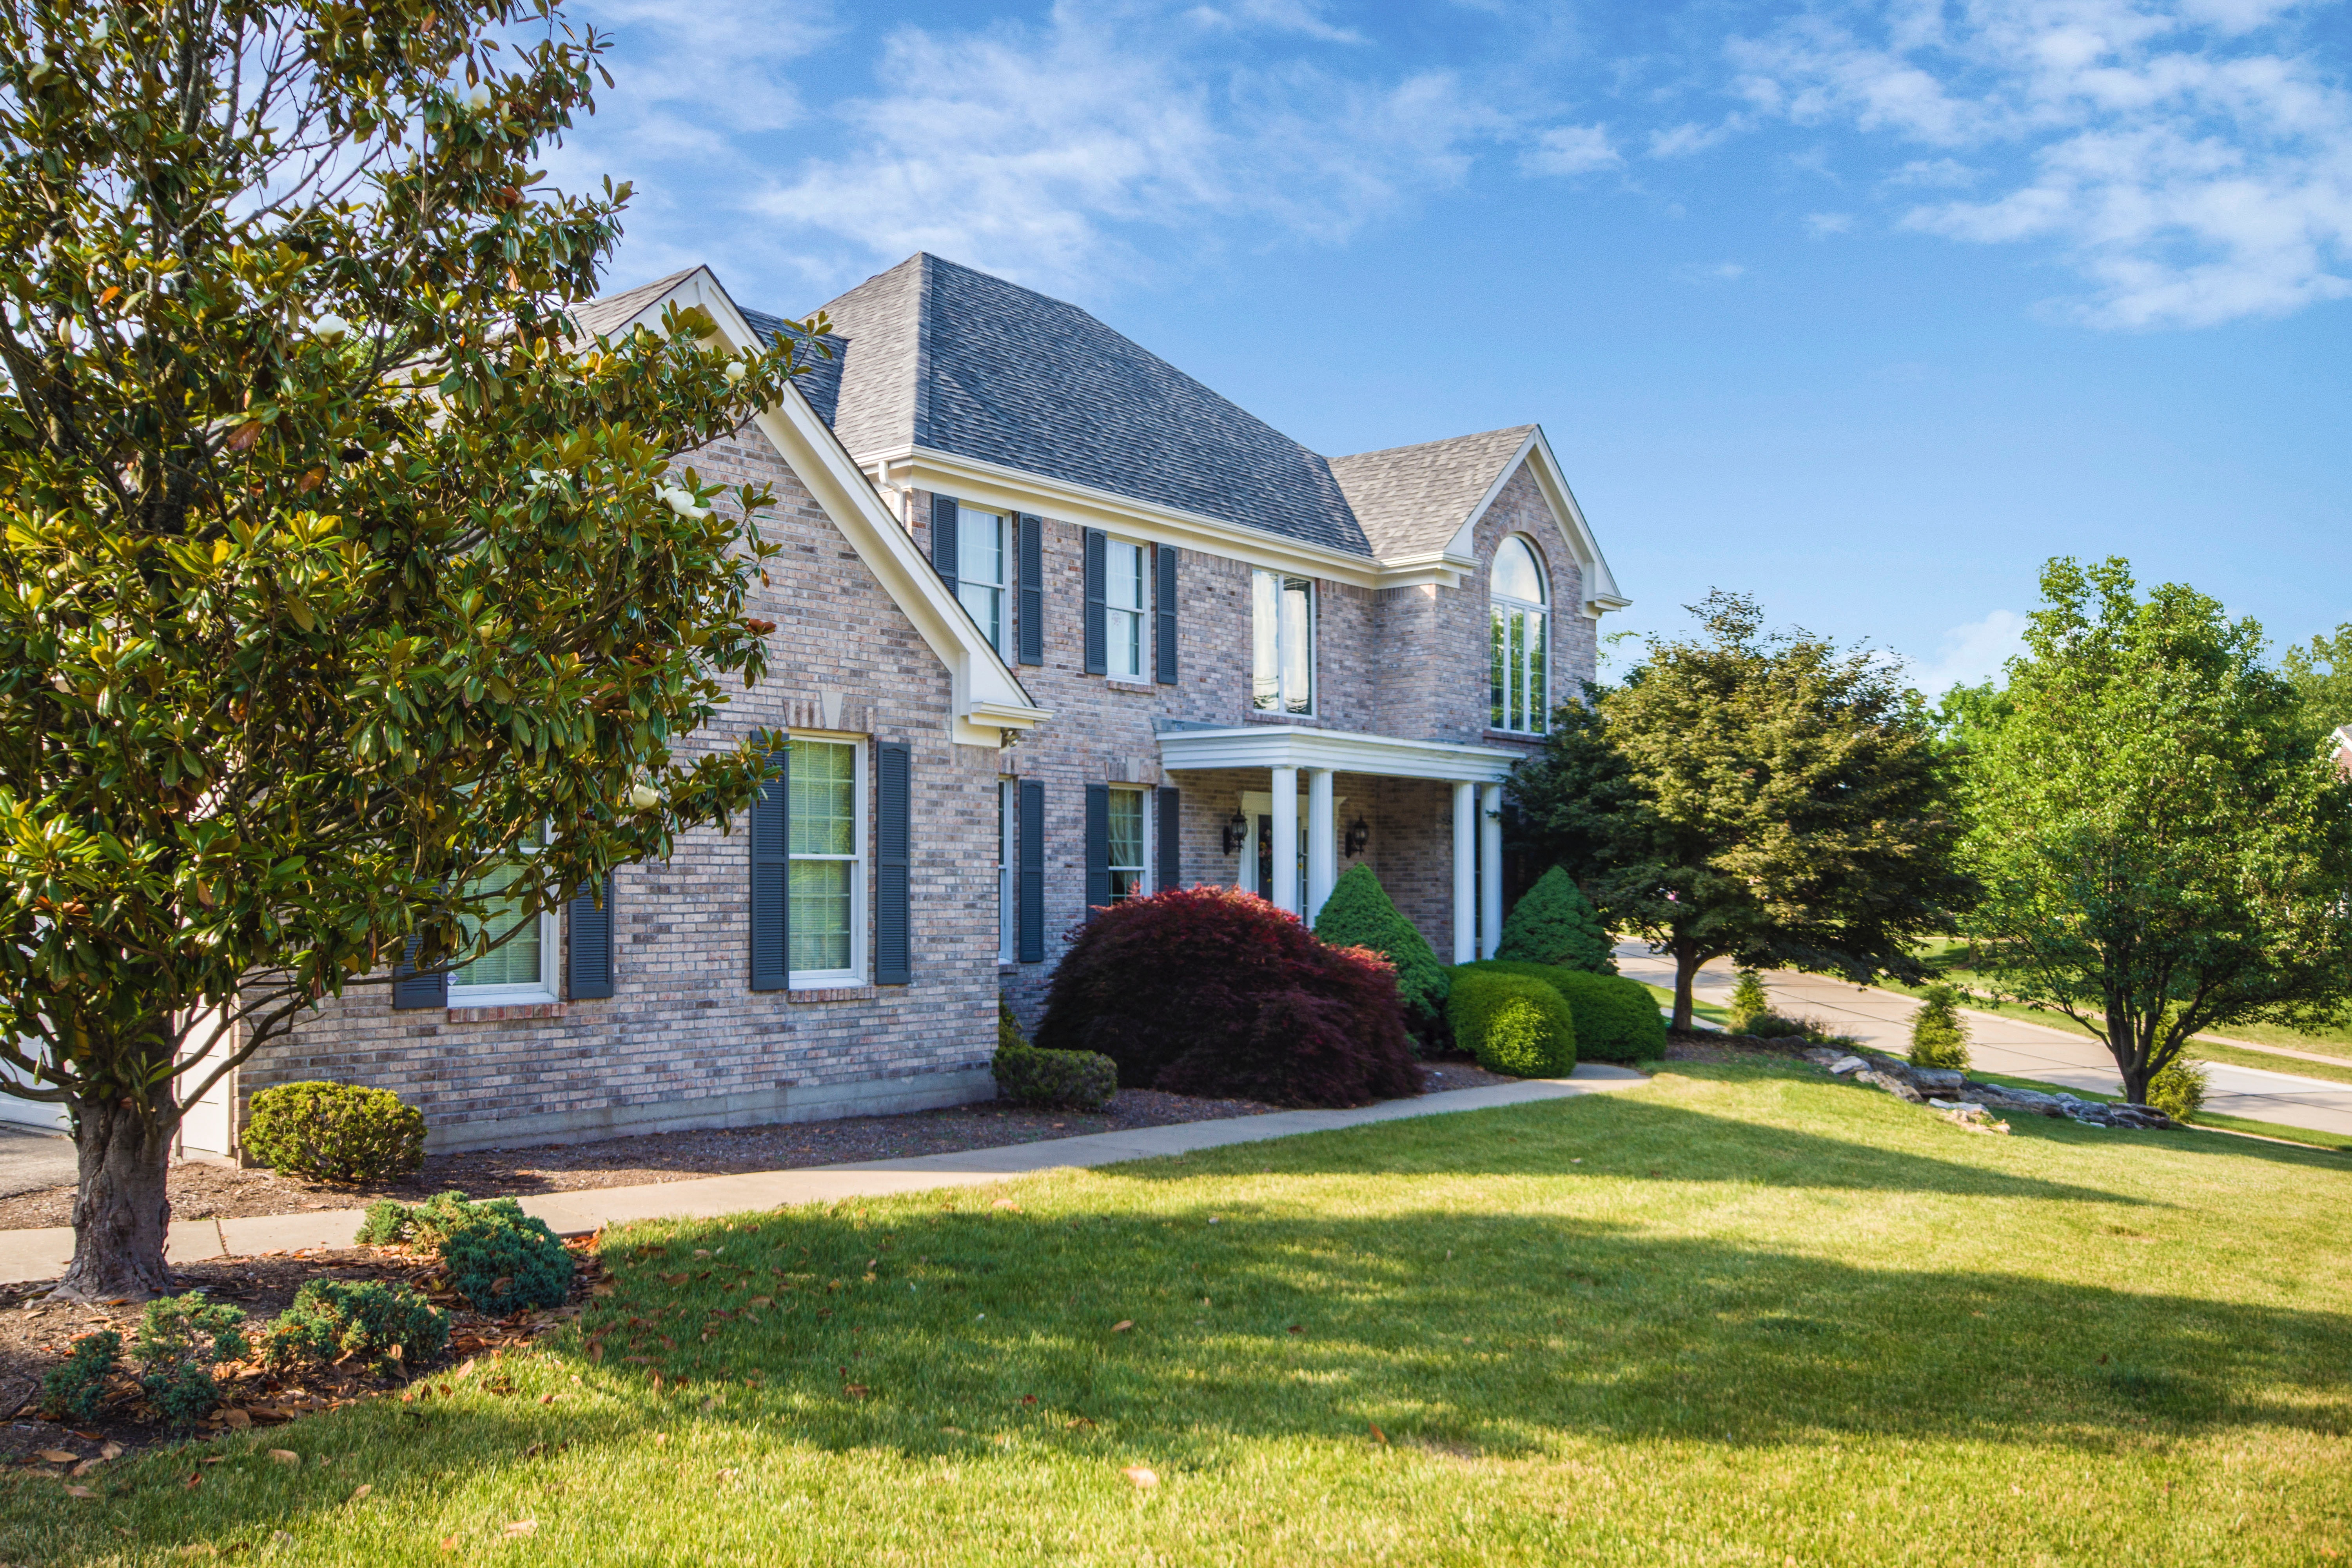 Curb Appeal Is Important - Even For Rental Properties